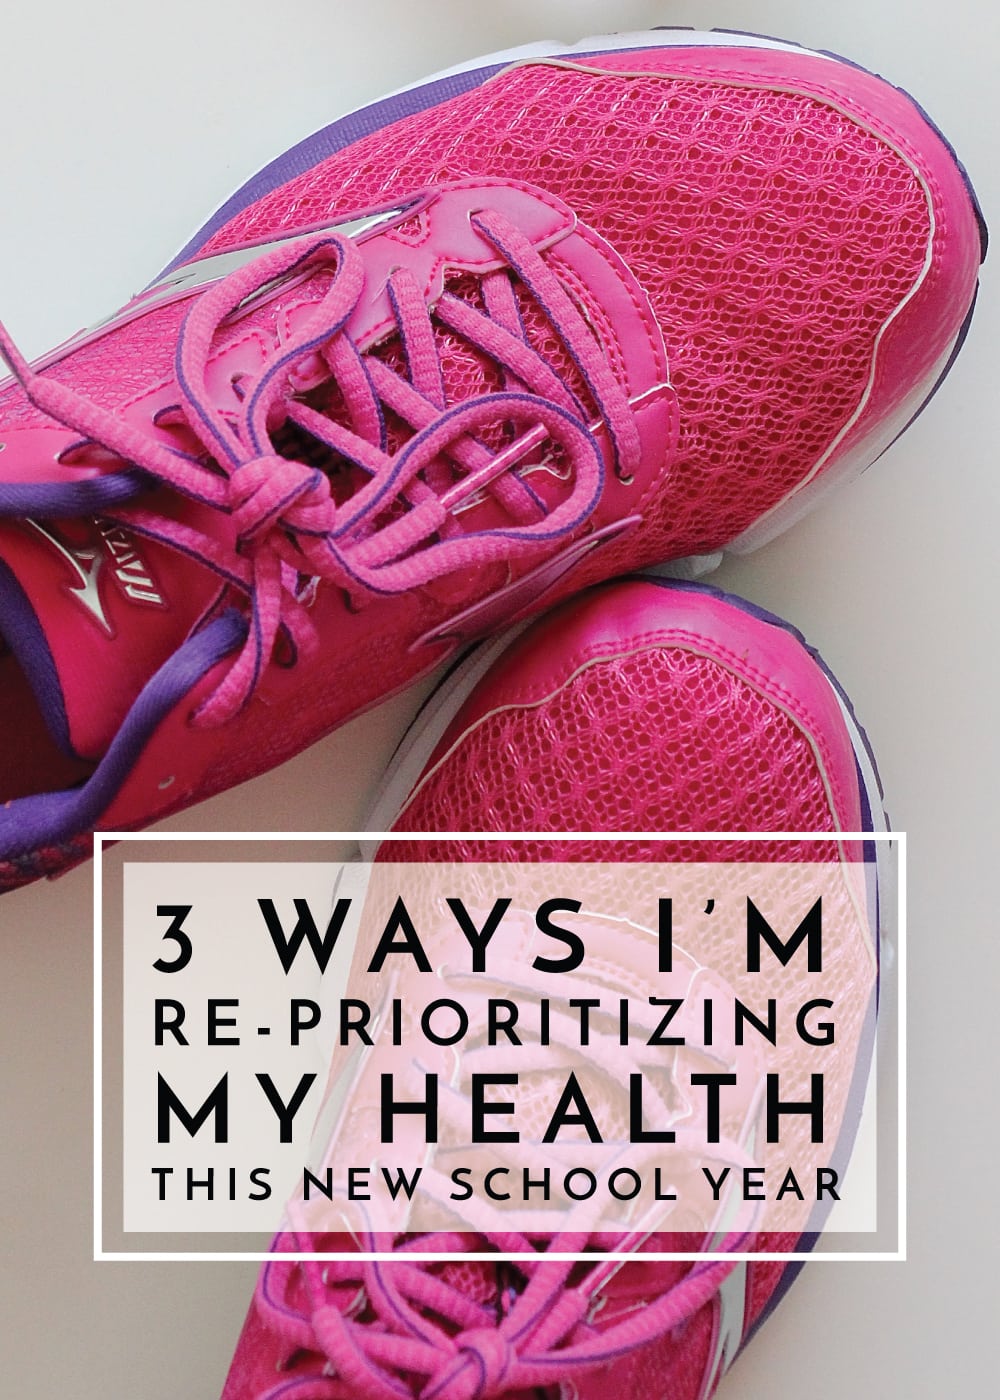 The school year brings a fresh start, and I'm sharing 3 strategies that are helping me reprioritize my health and fitness!